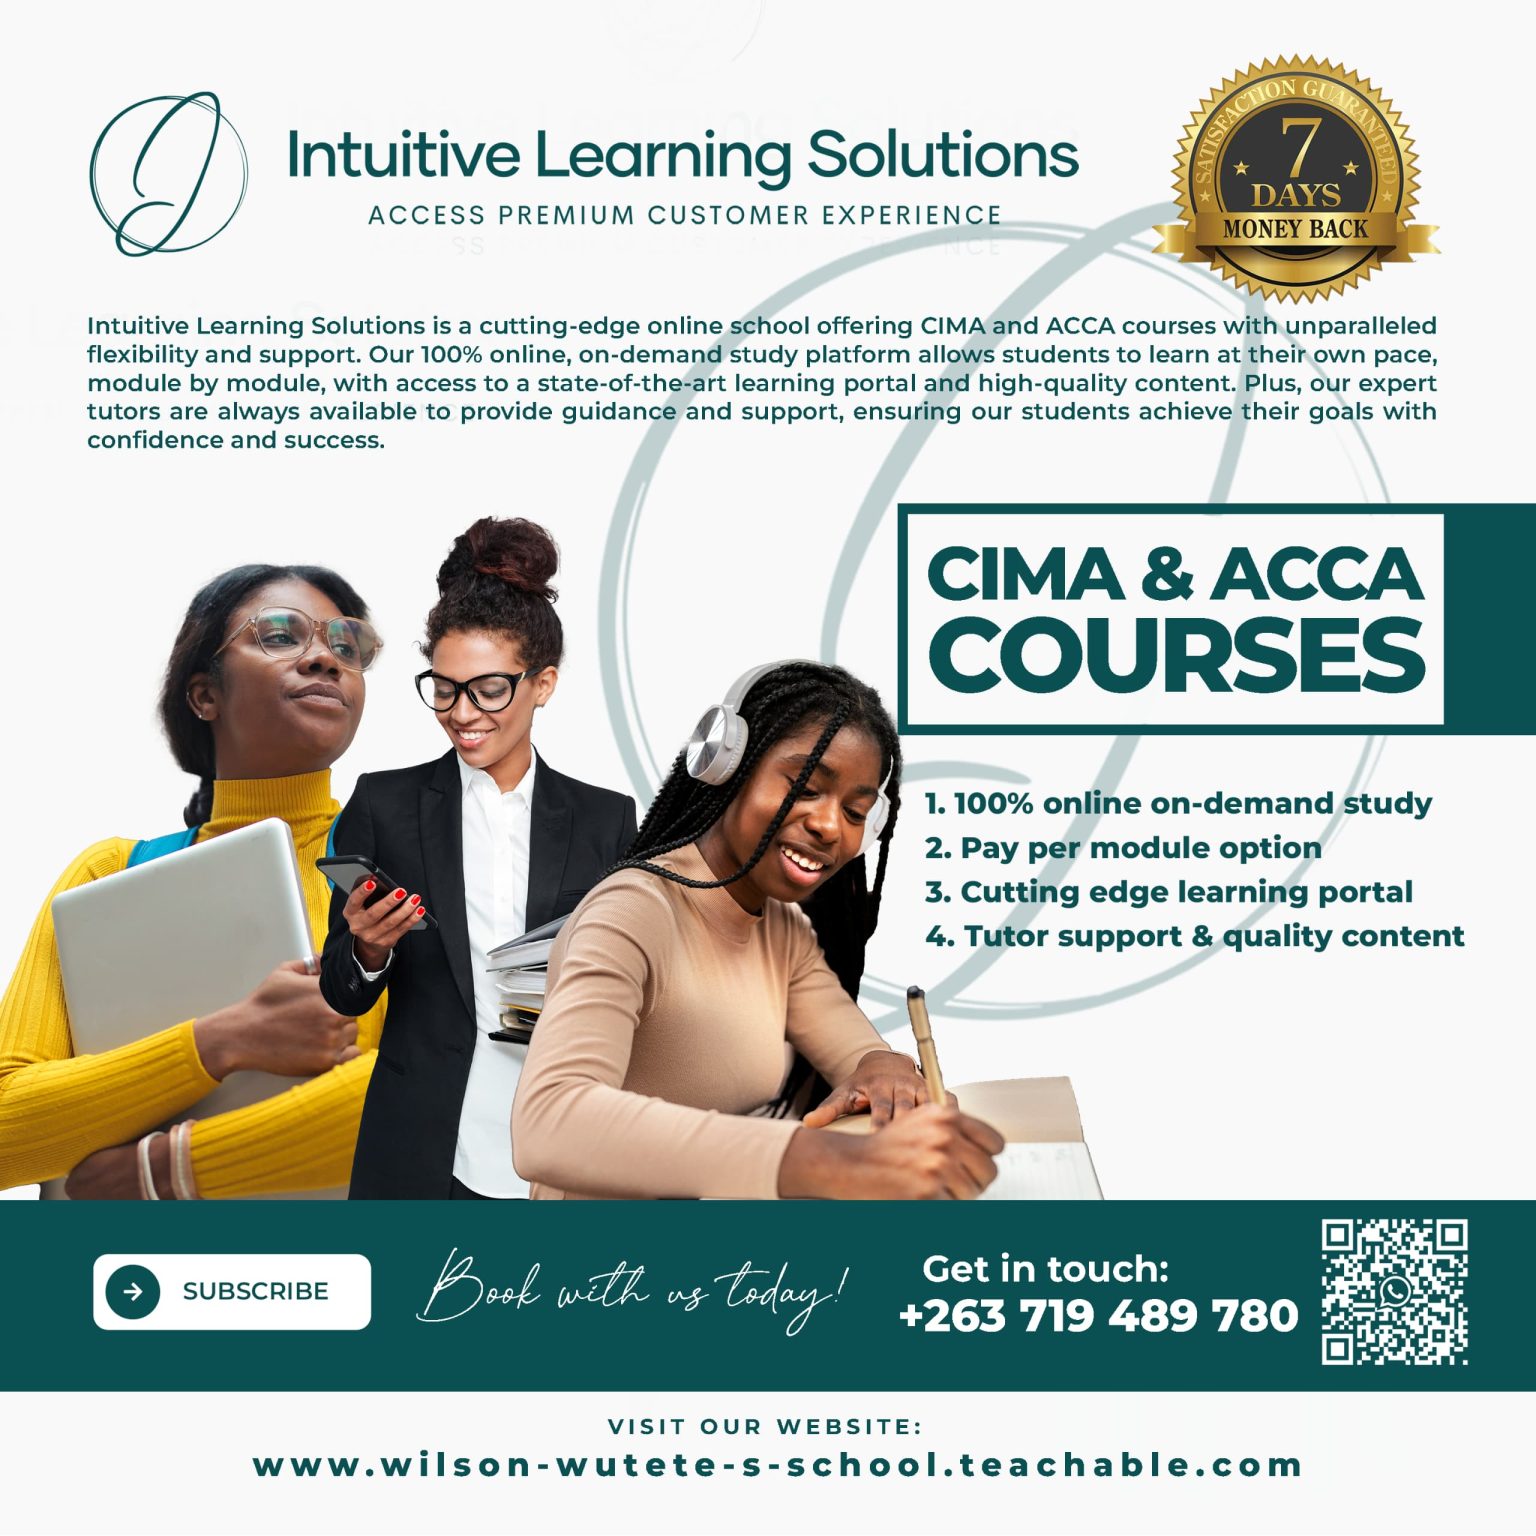 Intuitive Learning Solutions